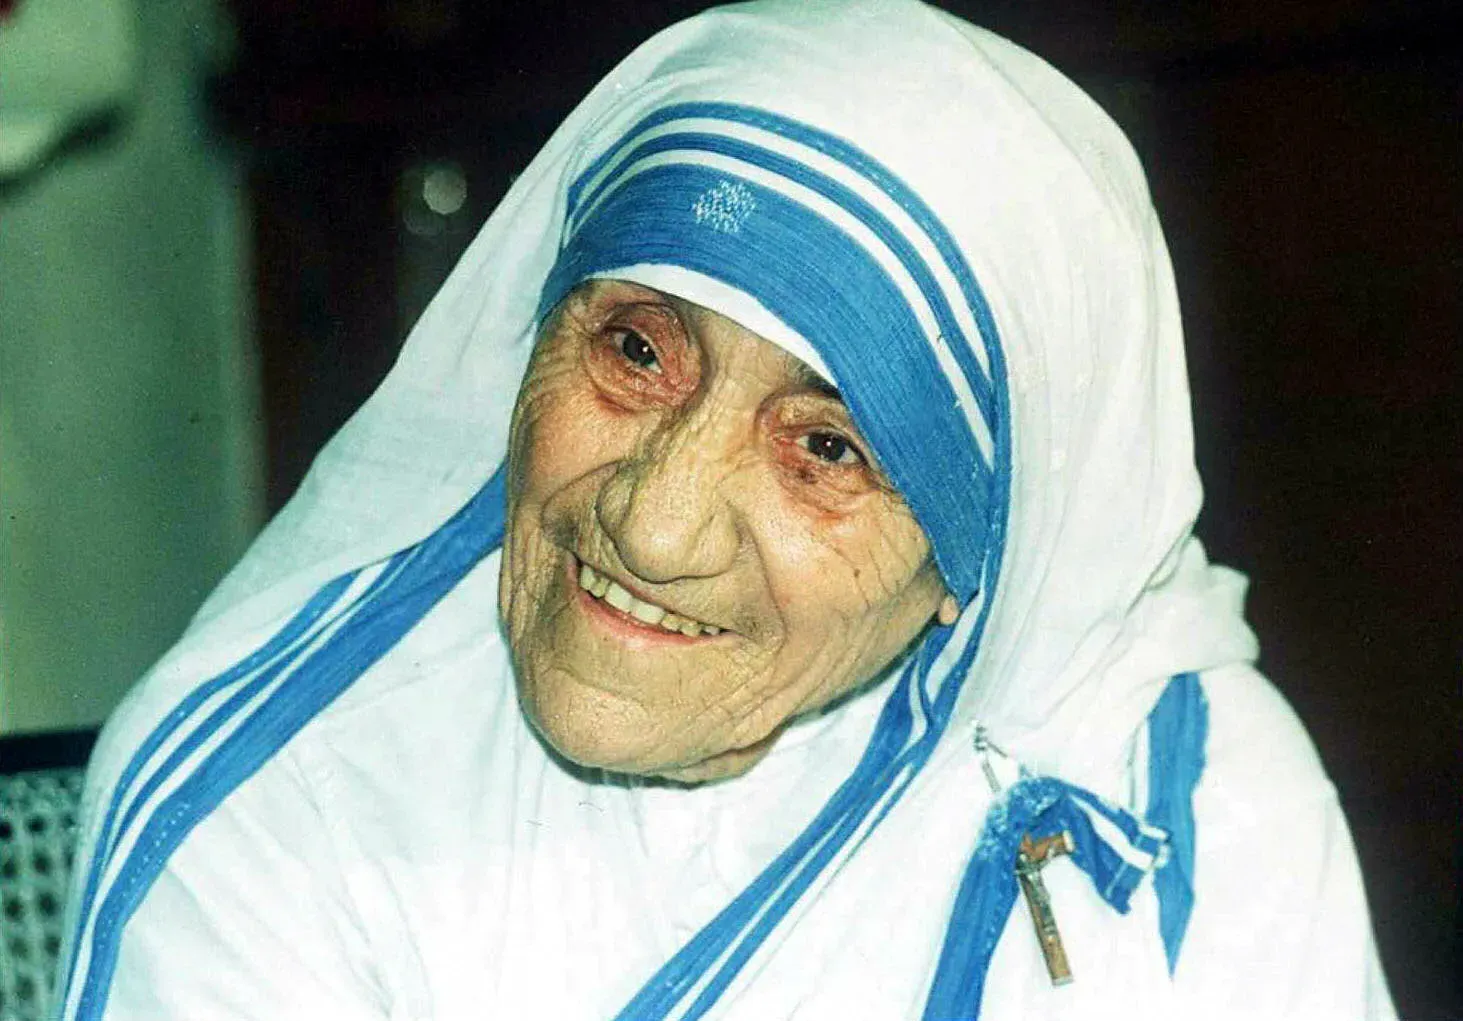 Mother Teresa smiles as she poses for photographers in Calcutta, India, on April 12, 1995. STR/AFP via Getty Images